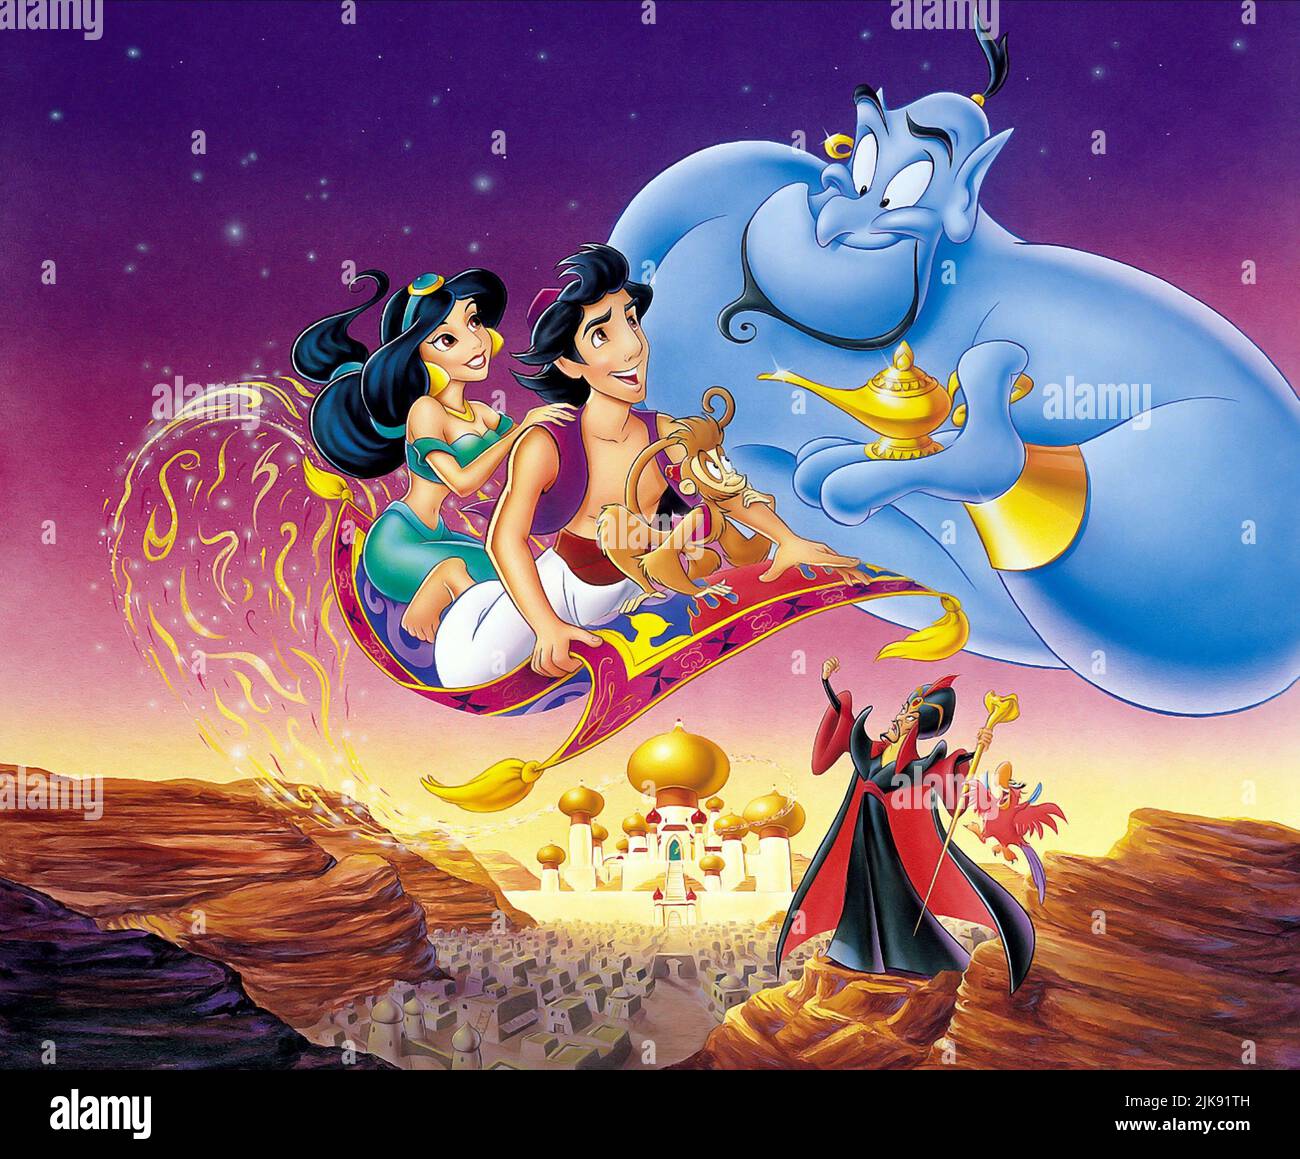 https://c8.alamy.com/comp/2JK91TH/princess-jasmine-alladin-abu-the-genie-jafar-film-aladdin-usa-1992-director-ron-clements-john-musker-08-november-1992-warning-this-photograph-is-for-editorial-use-only-and-is-the-copyright-of-walt-disney-pictures-andor-the-photographer-assigned-by-the-film-or-production-company-and-can-only-be-reproduced-by-publications-in-conjunction-with-the-promotion-of-the-above-film-a-mandatory-credit-to-walt-disney-pictures-is-required-the-photographer-should-also-be-credited-when-known-no-commercial-use-can-be-granted-without-written-authority-from-the-film-company-2JK91TH.jpg